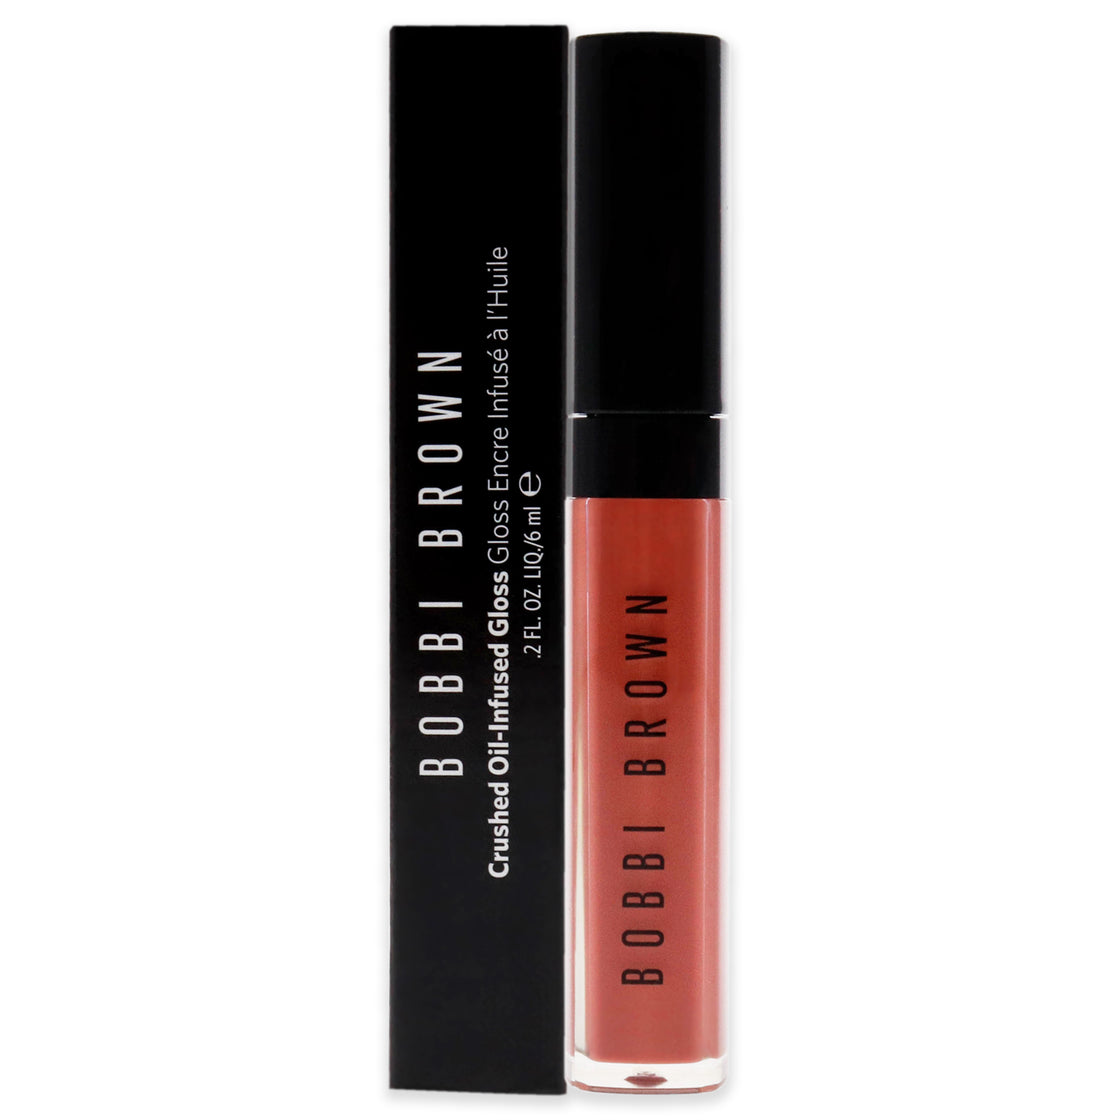 Crushed Oil-Infused Gloss - In The Buff by Bobbi Brown for Women - 0.2 oz Lip Gloss